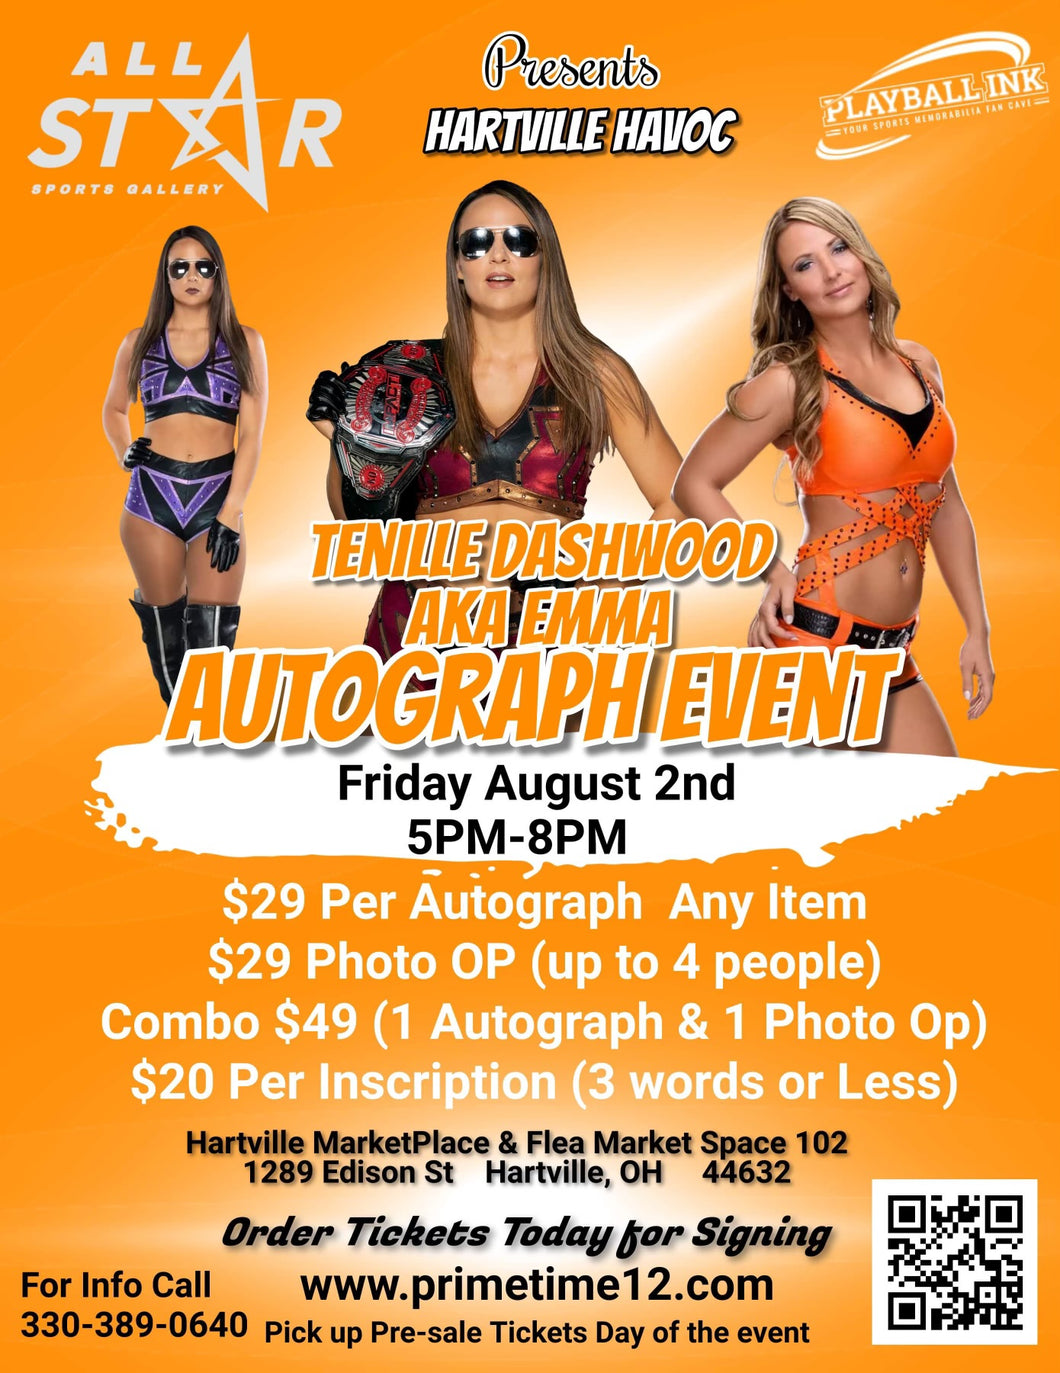 Tenille Dashwood AKA EMMA Pre-Sale ticket for autograph signing add on Inscription THIS IS NOT FOR AN AUTOGRAPH THIS IS TO HAVE HER ADD SOMETHING EXTRA TO YOUR AUTOGRAPH (3 Words Max)